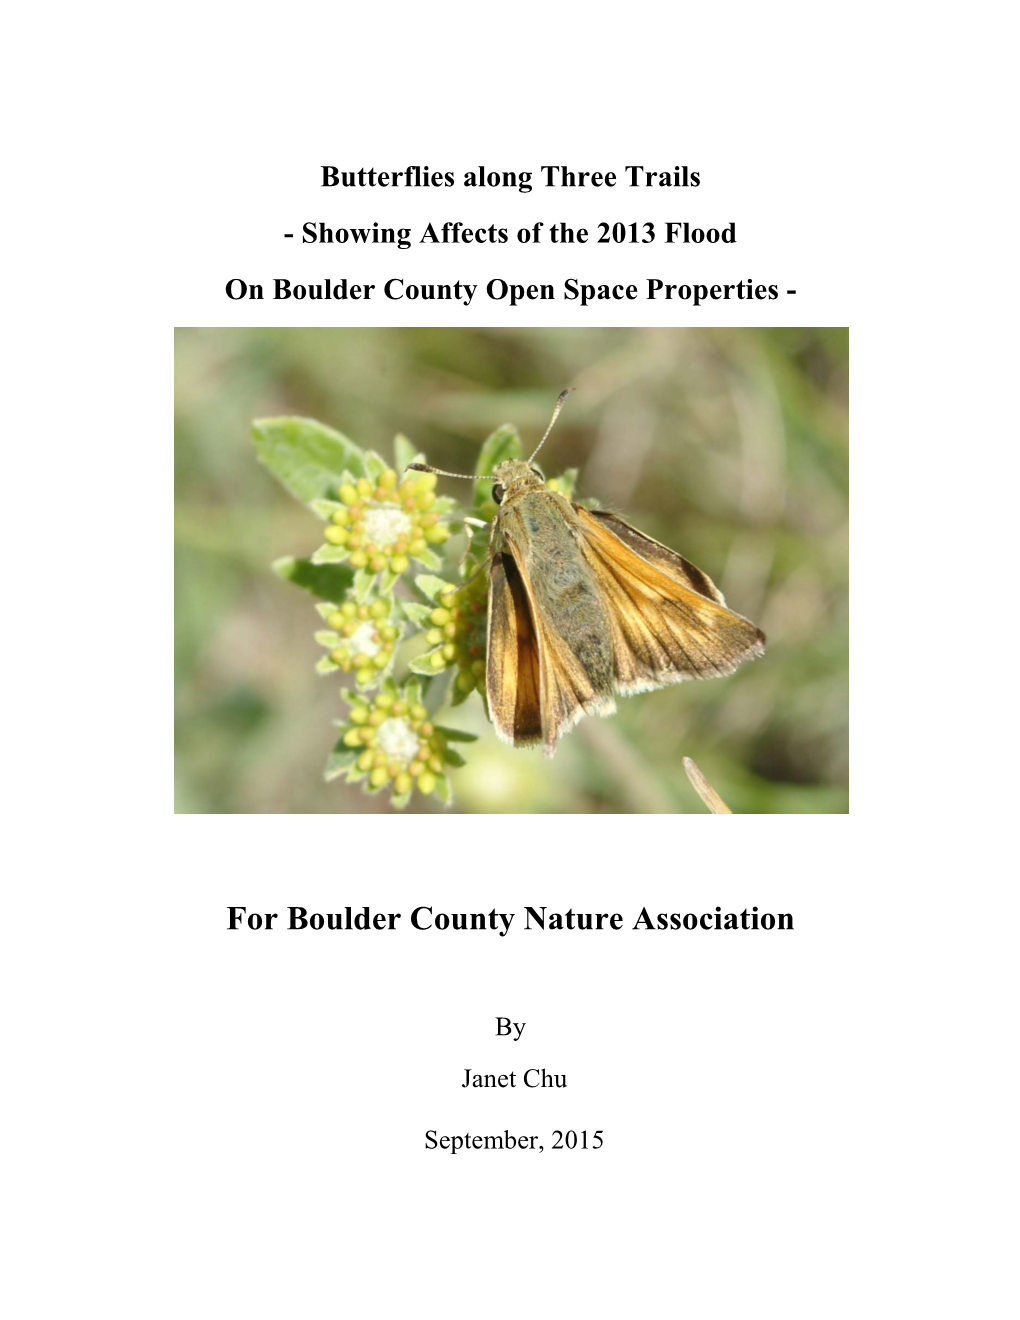 Butterflies Along Three Trails: Showing Affects of the 2013 Flood On